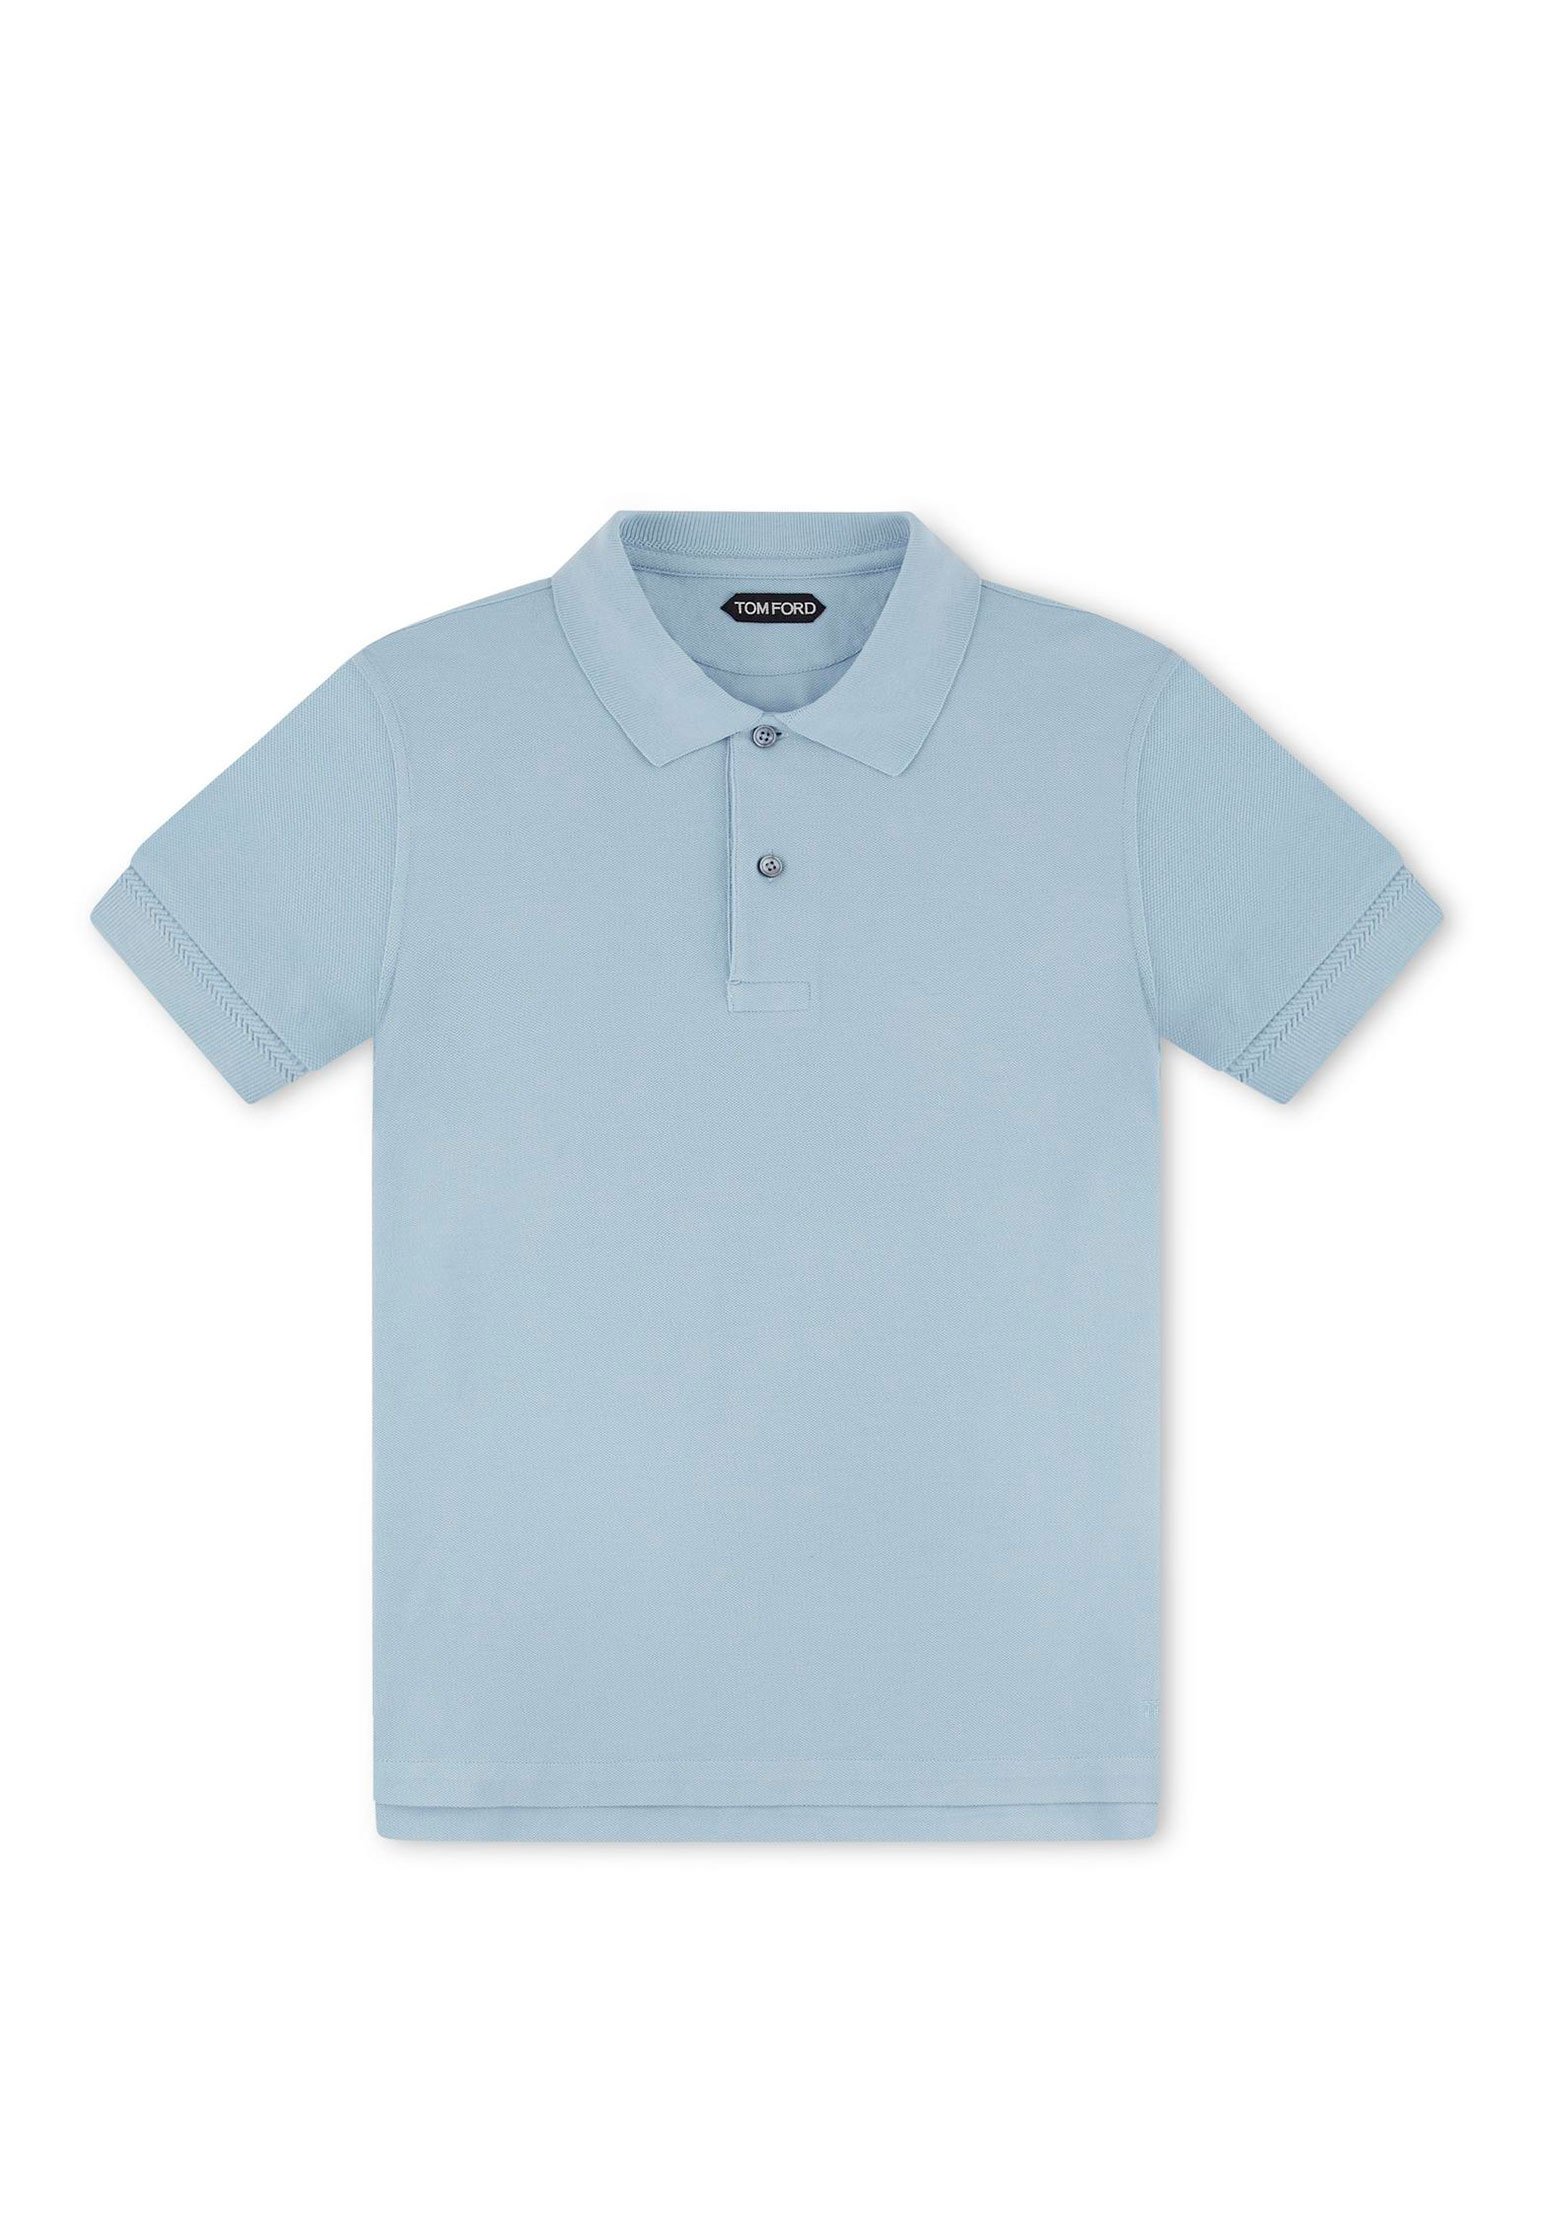 Polo TOM FORD Color: blue (Code: 1154) in online store Allure